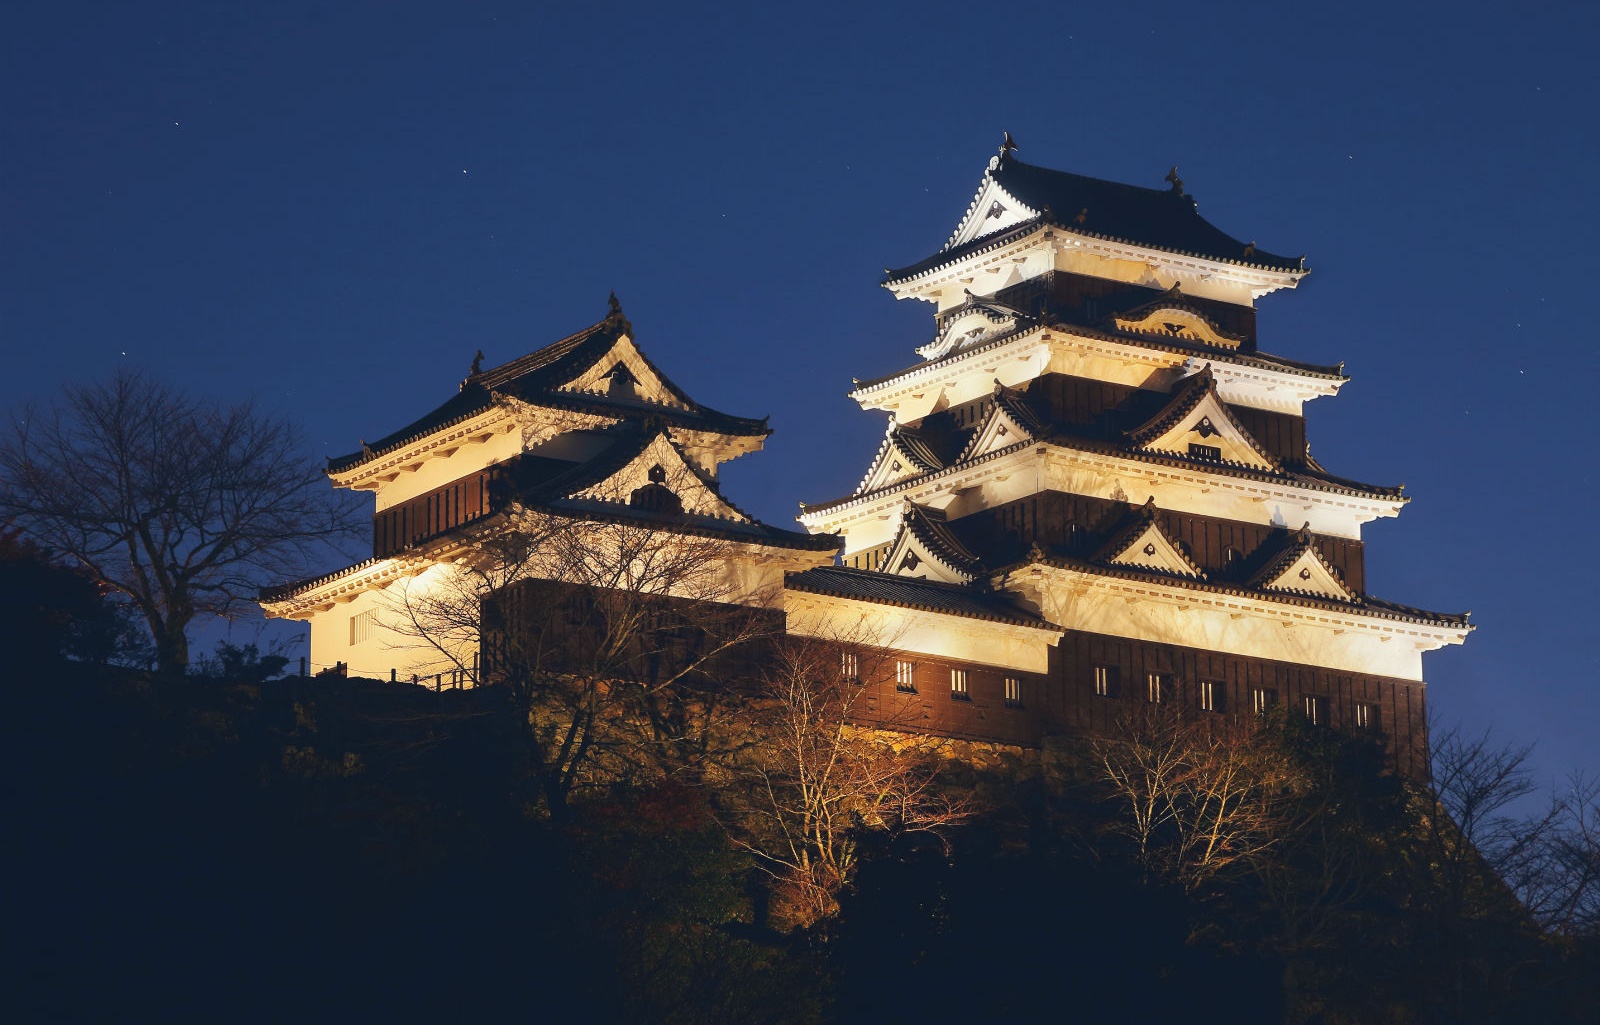 Be the Lord of the Domain with a Luxury Stay in a Japanese Castle!